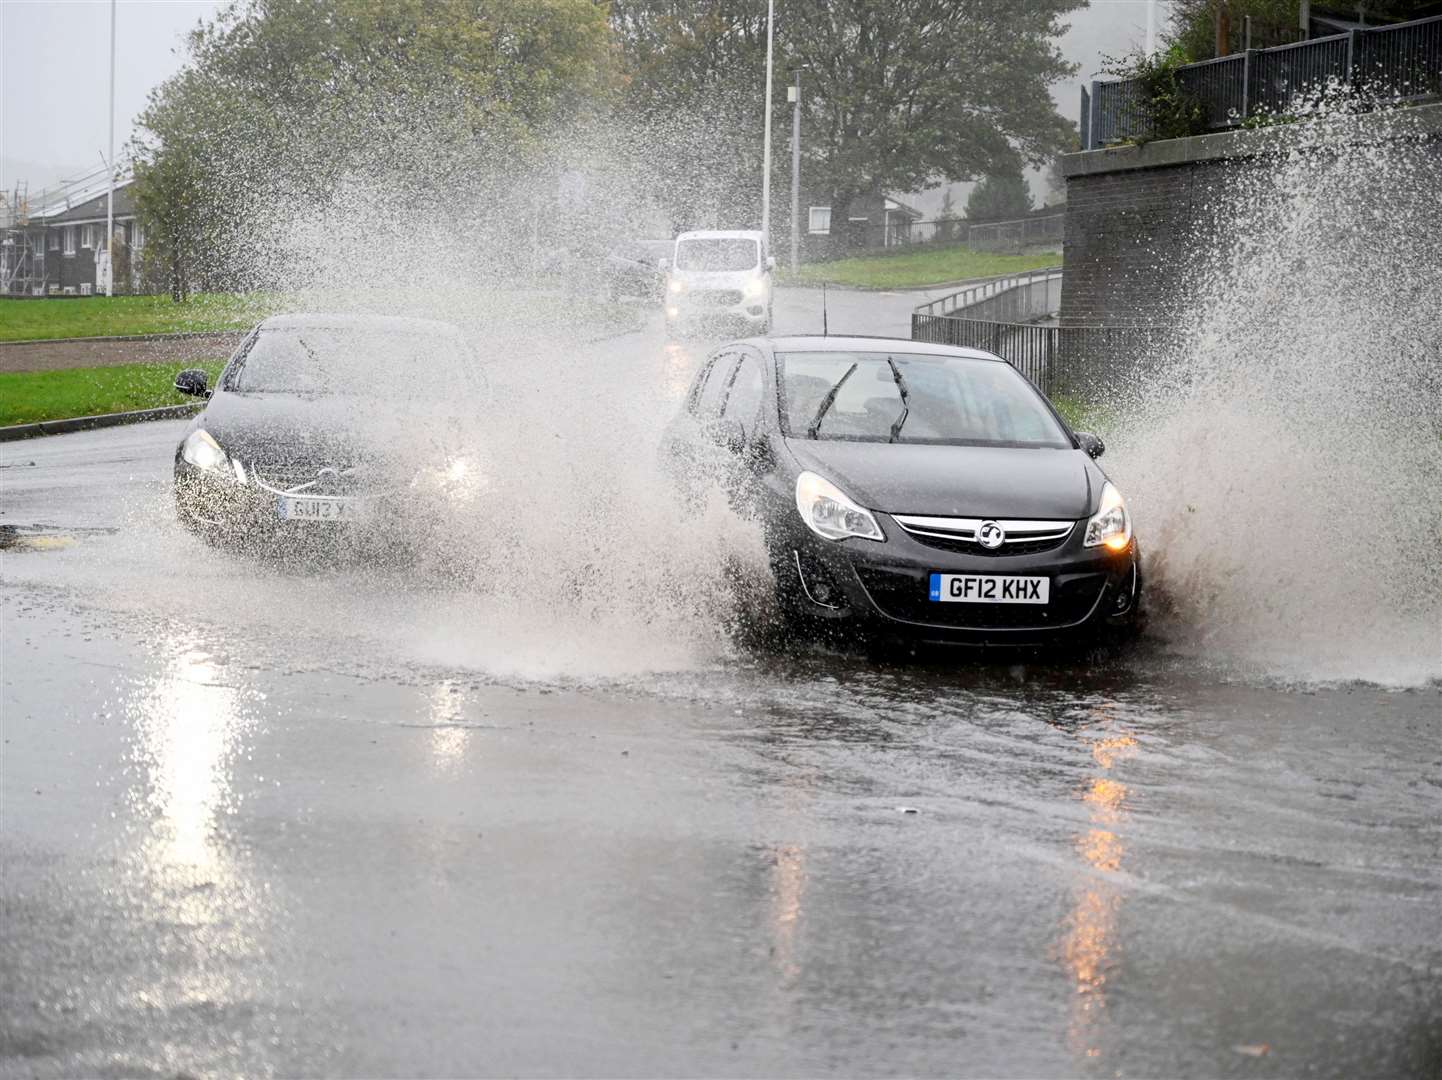 Delays on the road and flooding is expected to continue over the next couple of days. Picture: Barry Goodwin